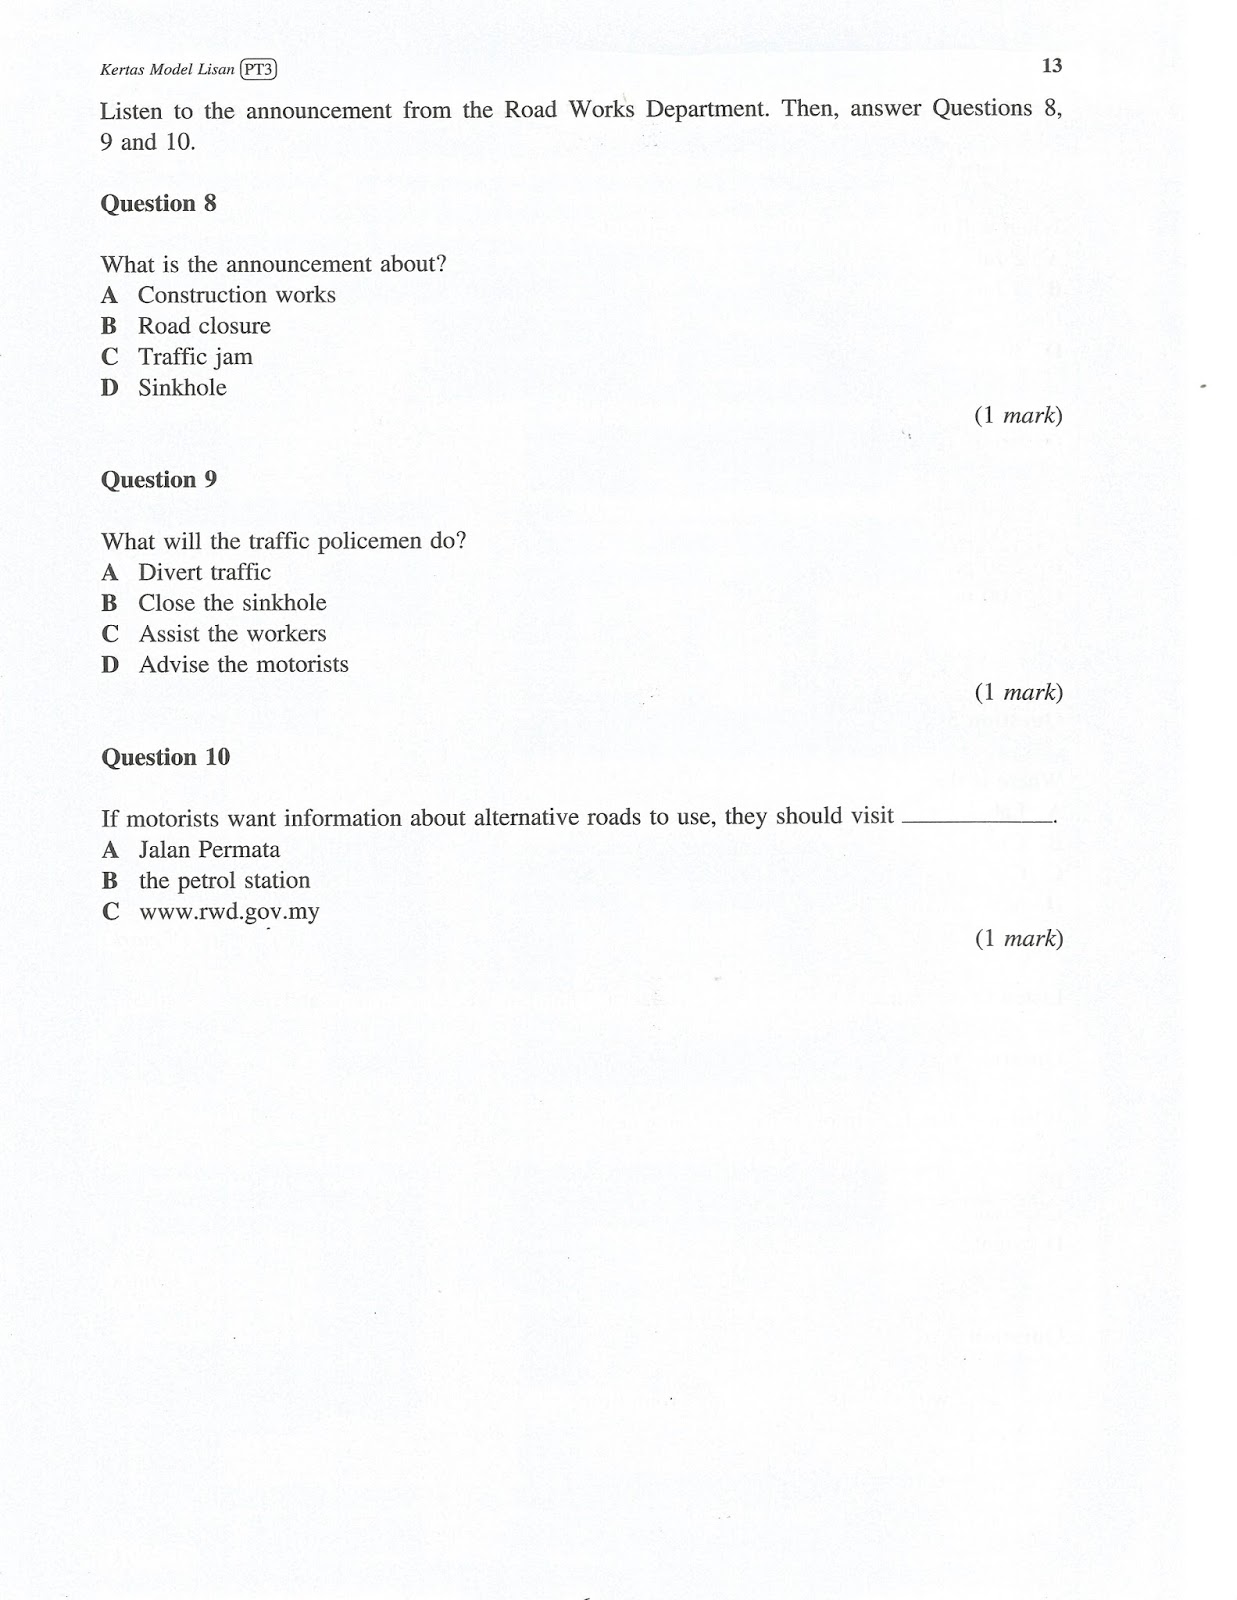 PonPonProduction: PT3 Oral Test Example Question